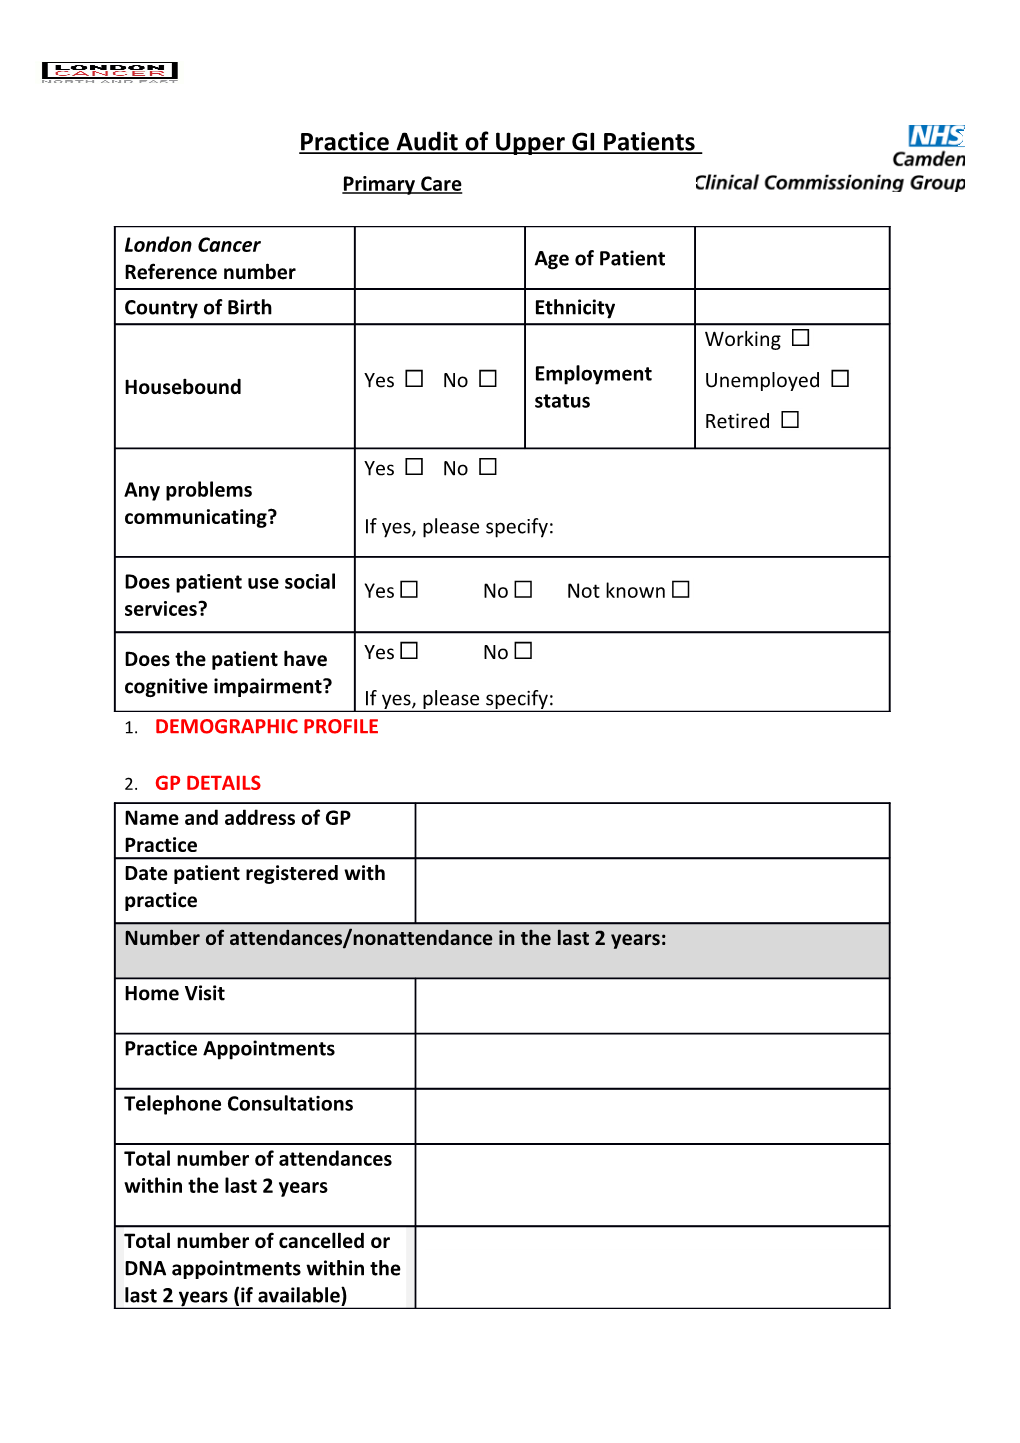 London Cancer Reference Number: London Cancer Primary Care Audit